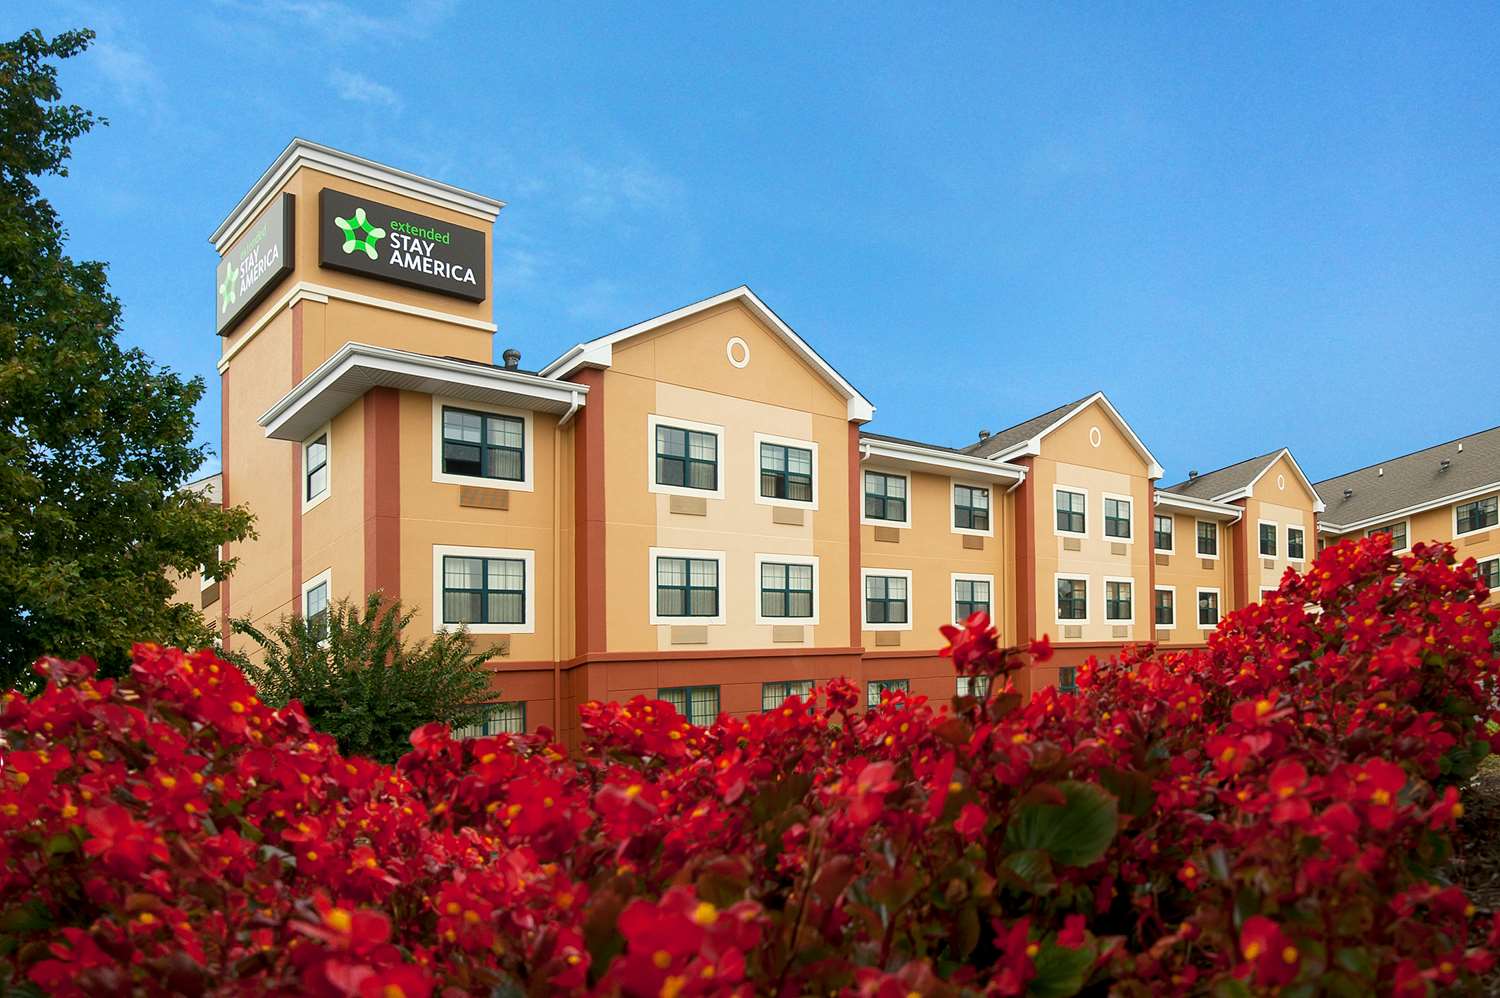 Pet Friendly Extended Stay America Columbia - Columbia  Parkway in Columbia, Maryland